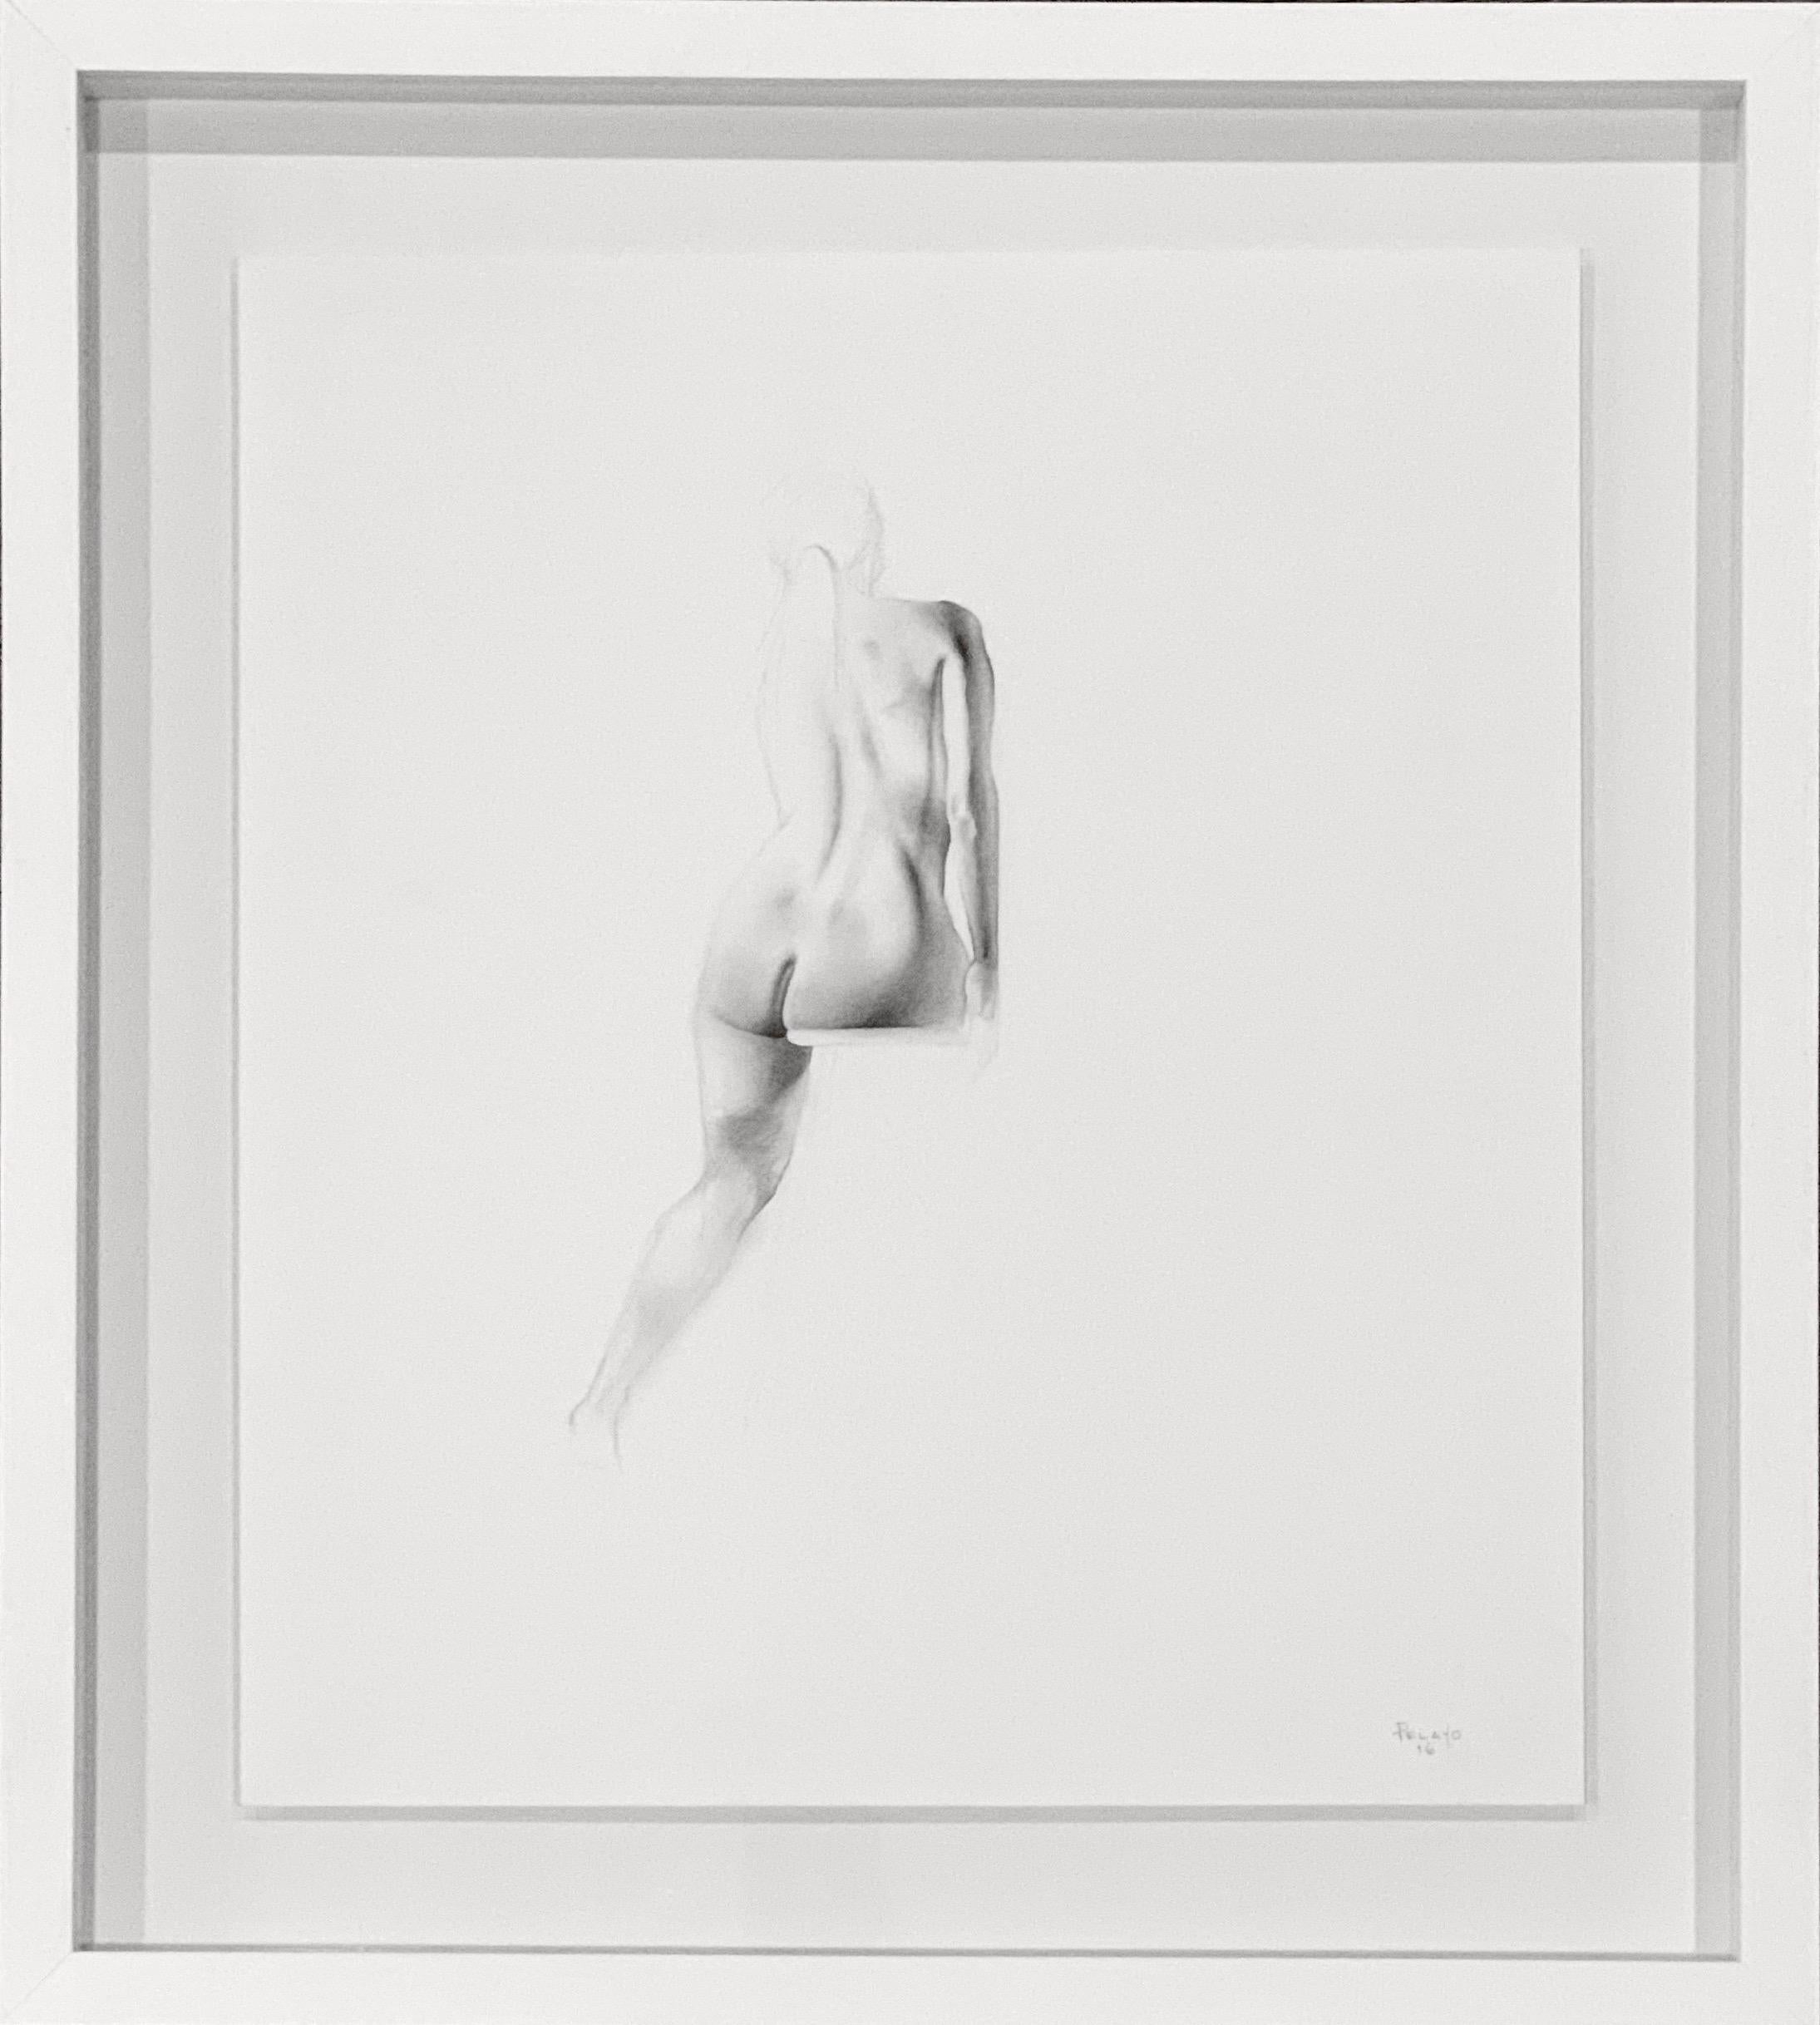 "Untitled 26" (FRAMED) Pencil Drawing 21" x 18" inch by Antonio Pelayo

Medium: Pencil on Paper

Artist Antonio Pelayo, born in Glendale, California, and yet raised for most of his childhood in the Mexican countryside, has never had his own country.